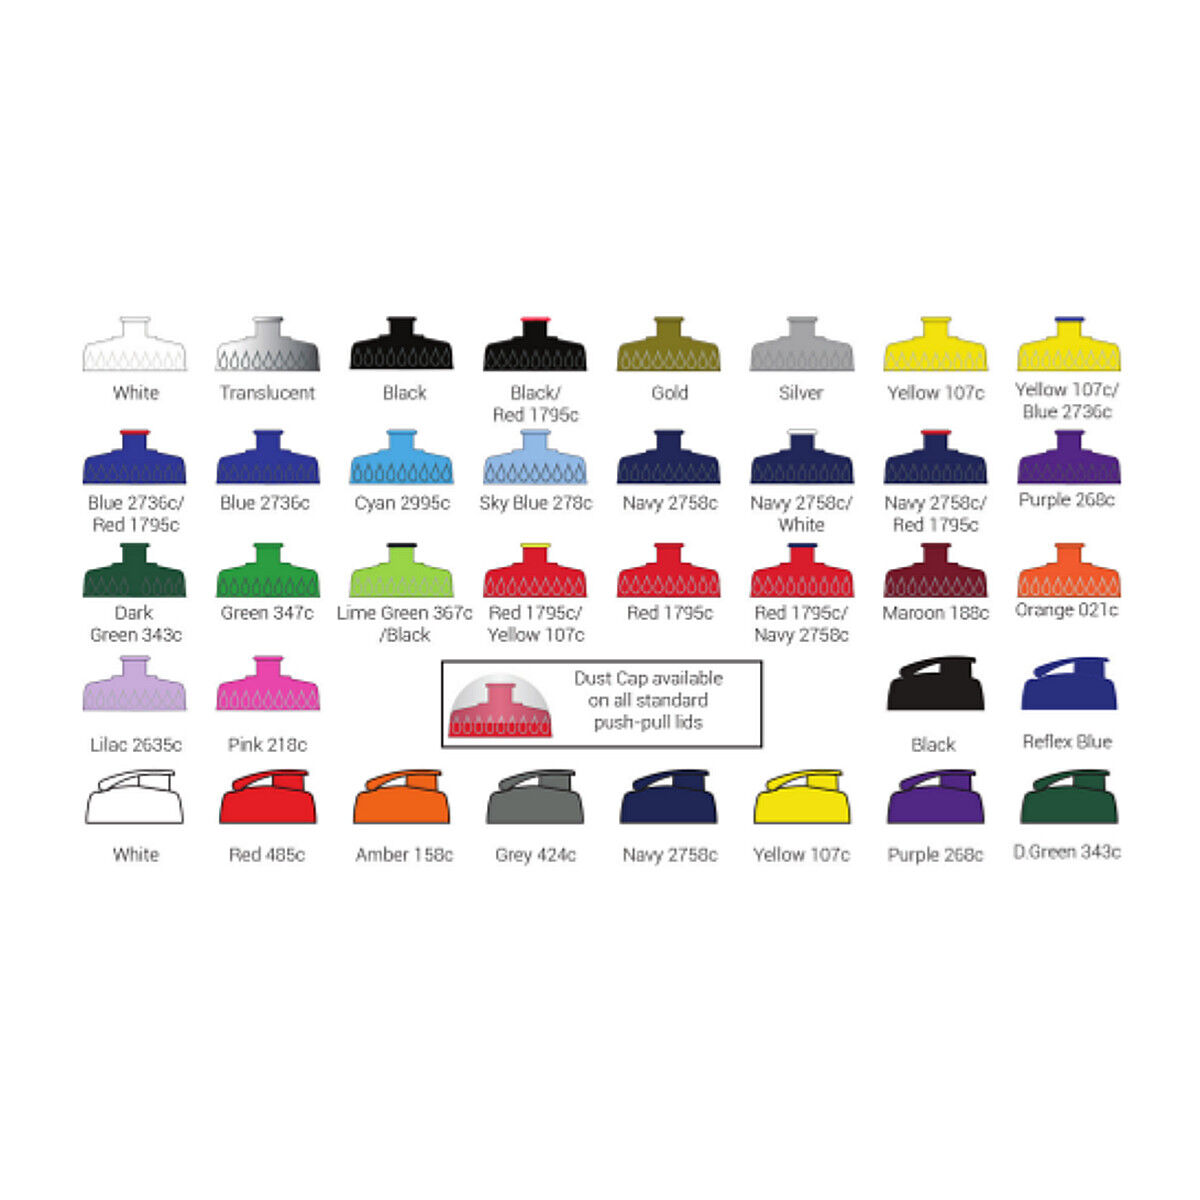 Choice of colours for push-pull and flip-top lids